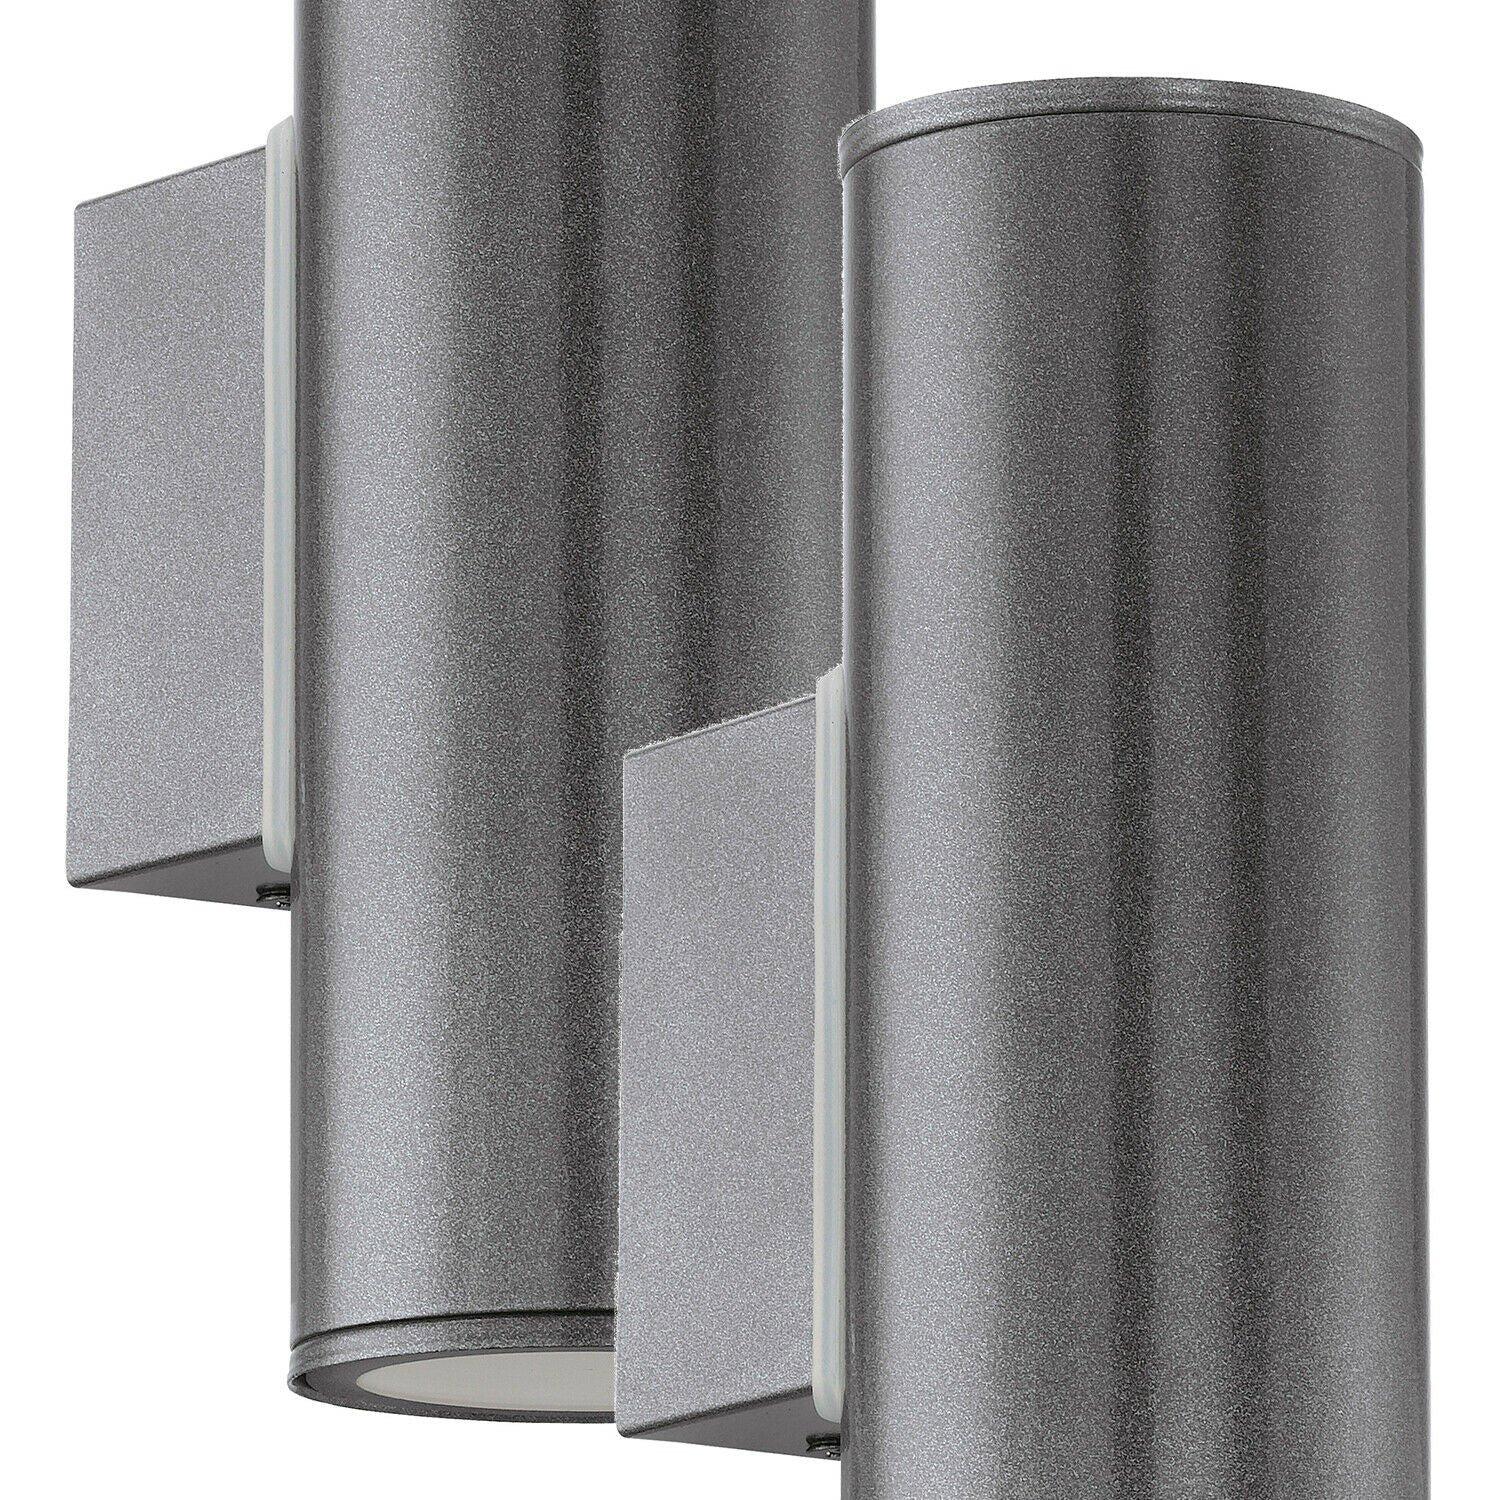 2 PACK IP44 Outdoor Wall Light Anthracite Zinc Plated Steel 2x 3W GU10